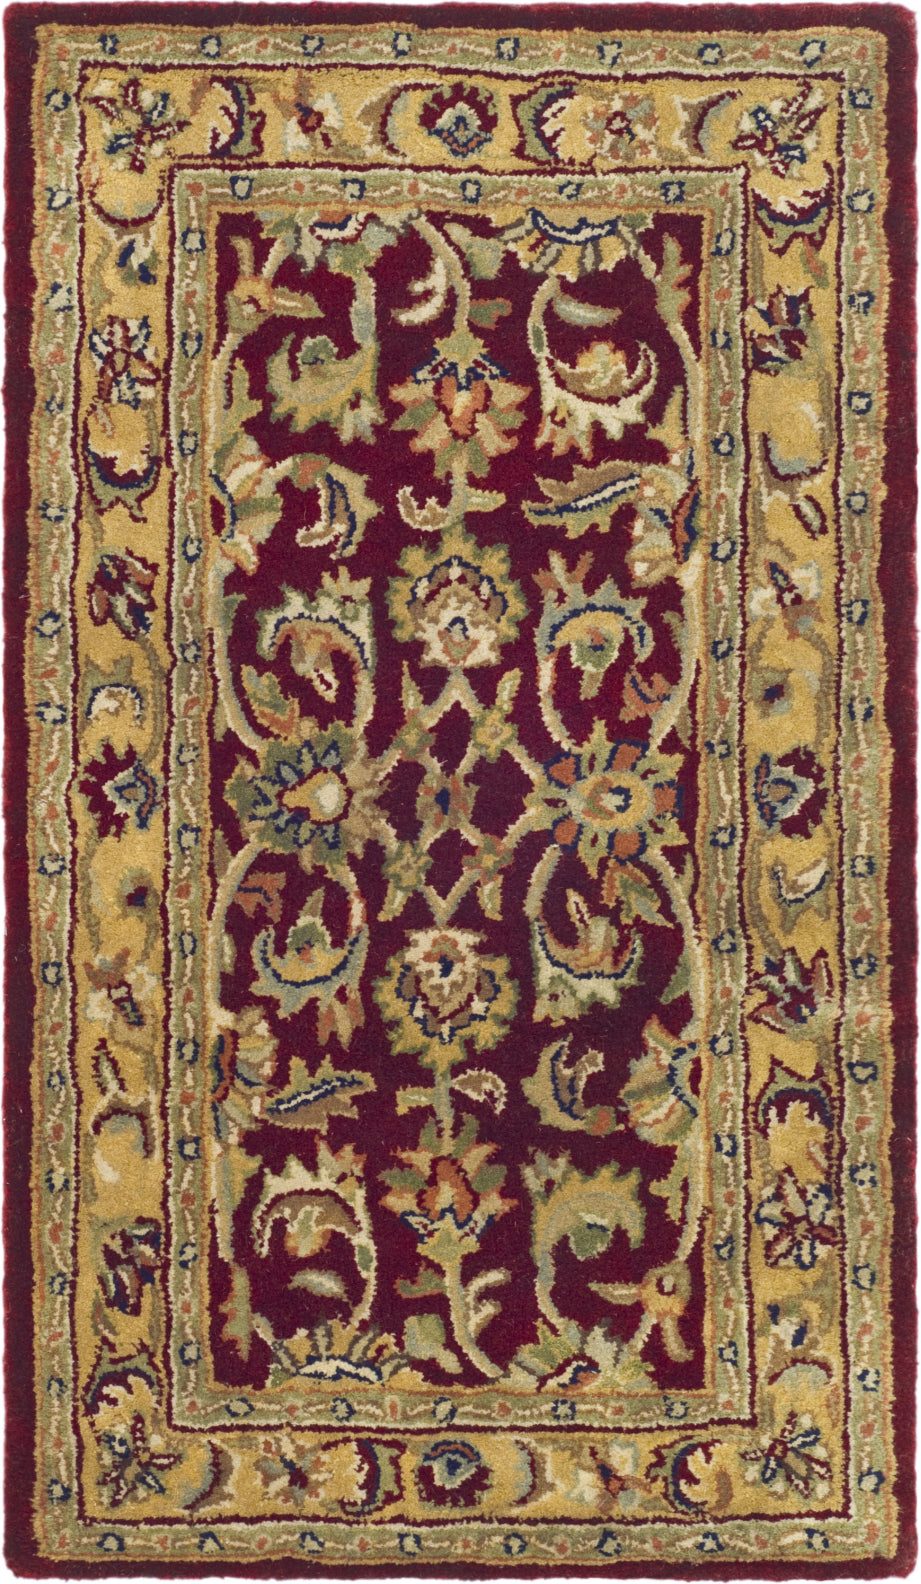 Safavieh Classic Cl758 Red/Gold Area Rug main image